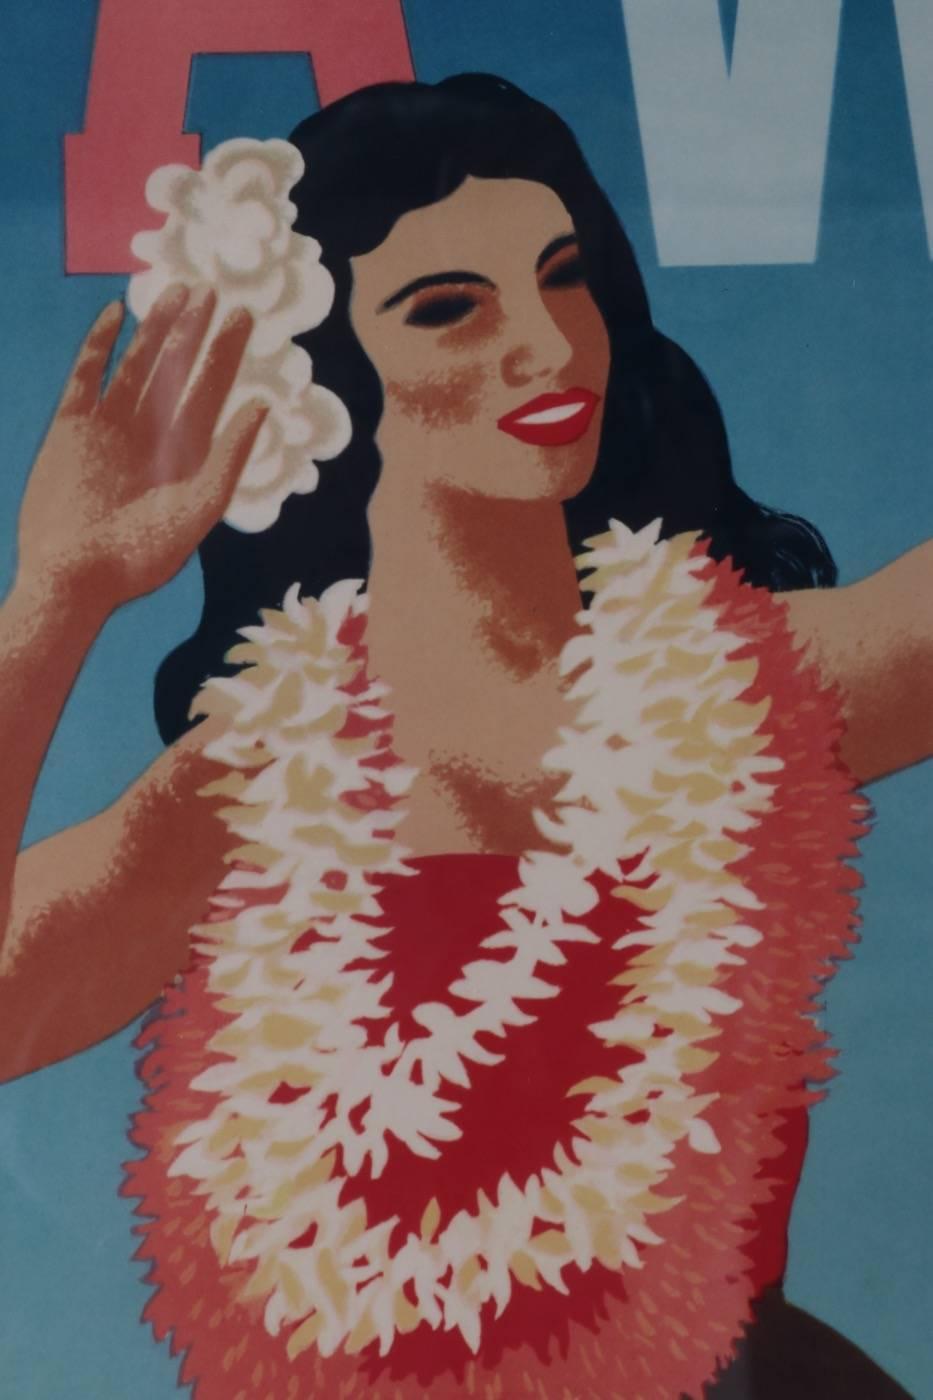 American Hawaii Travel Posters, Original 1960, United Airlines, PAN AM For Sale